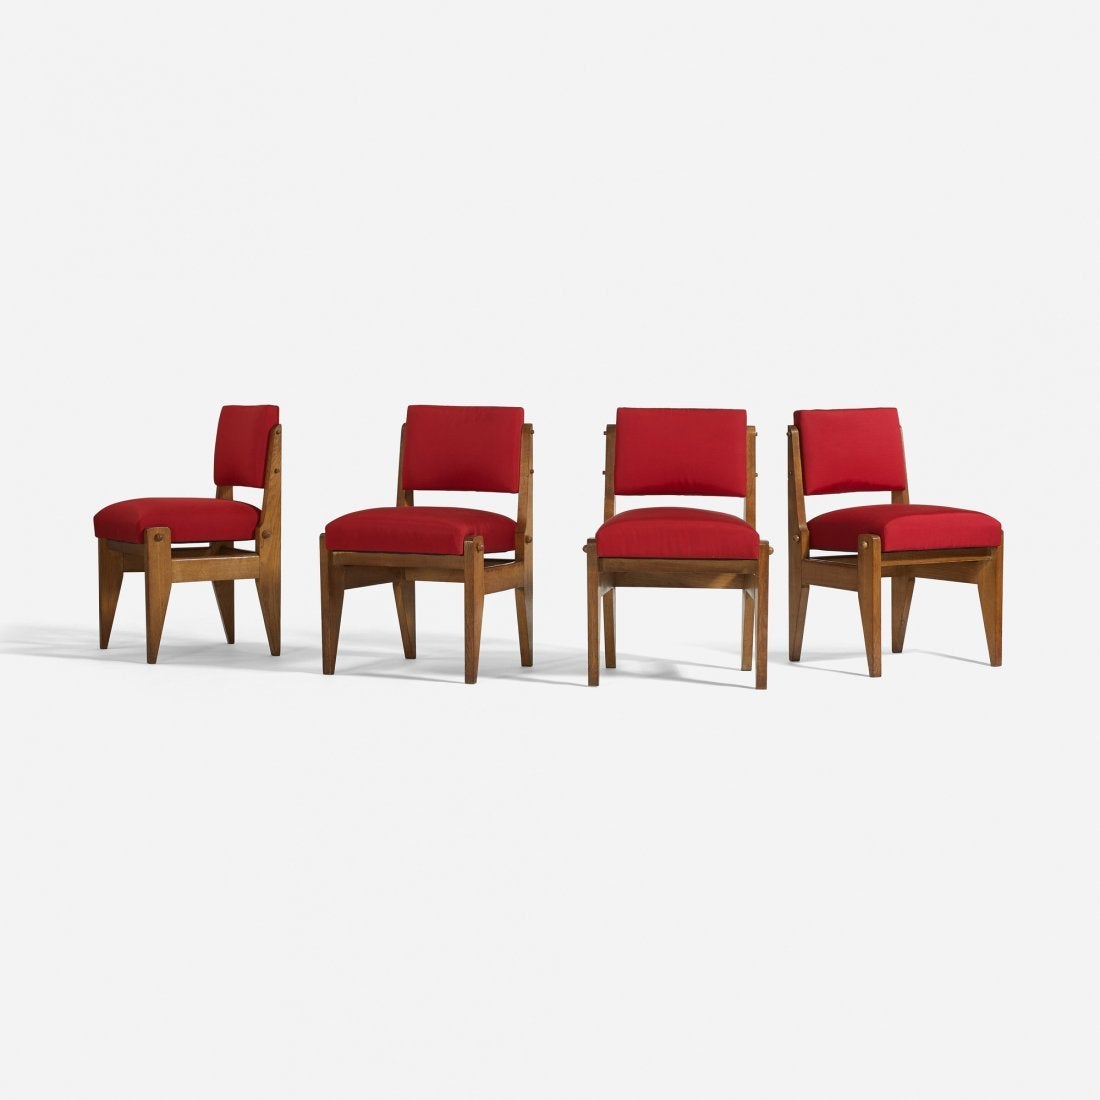 Robert Guillerme and Jacques Chambron dining chairs, set of four.
France, circa 1950.
Stained oak, upholstery.
Dimension: 22 W x 20 D x 31.5 H inches.